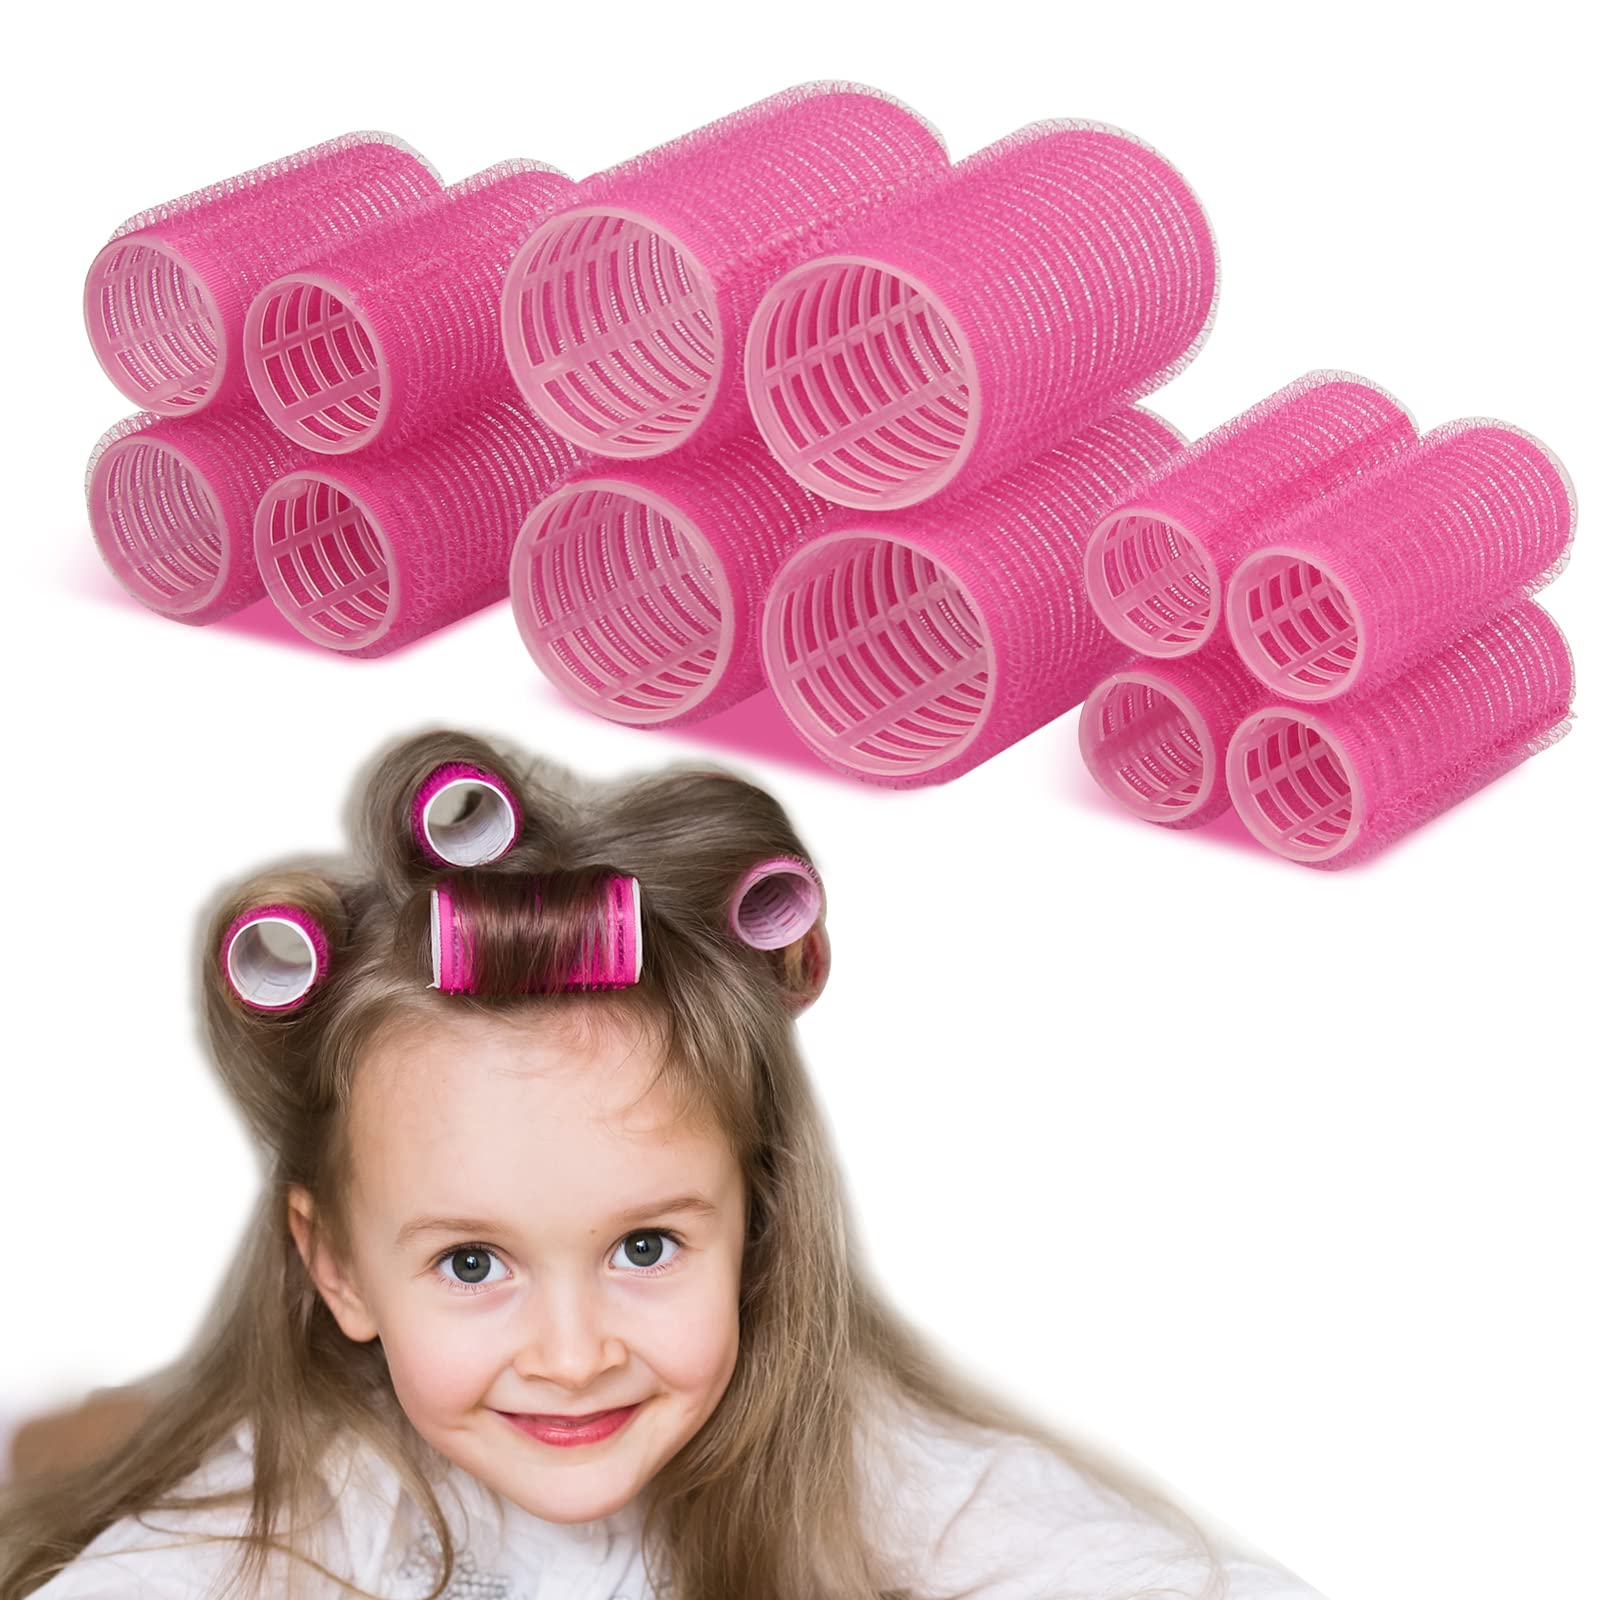 Hair Rollers for Short Hair, 12Pcs Small Rollers Hair Curlers for Short  Medium Long Fine Thin Hair Self Grip No Heat 3 Sizes(12pcs,Rose Red) 12  Piece Assortment